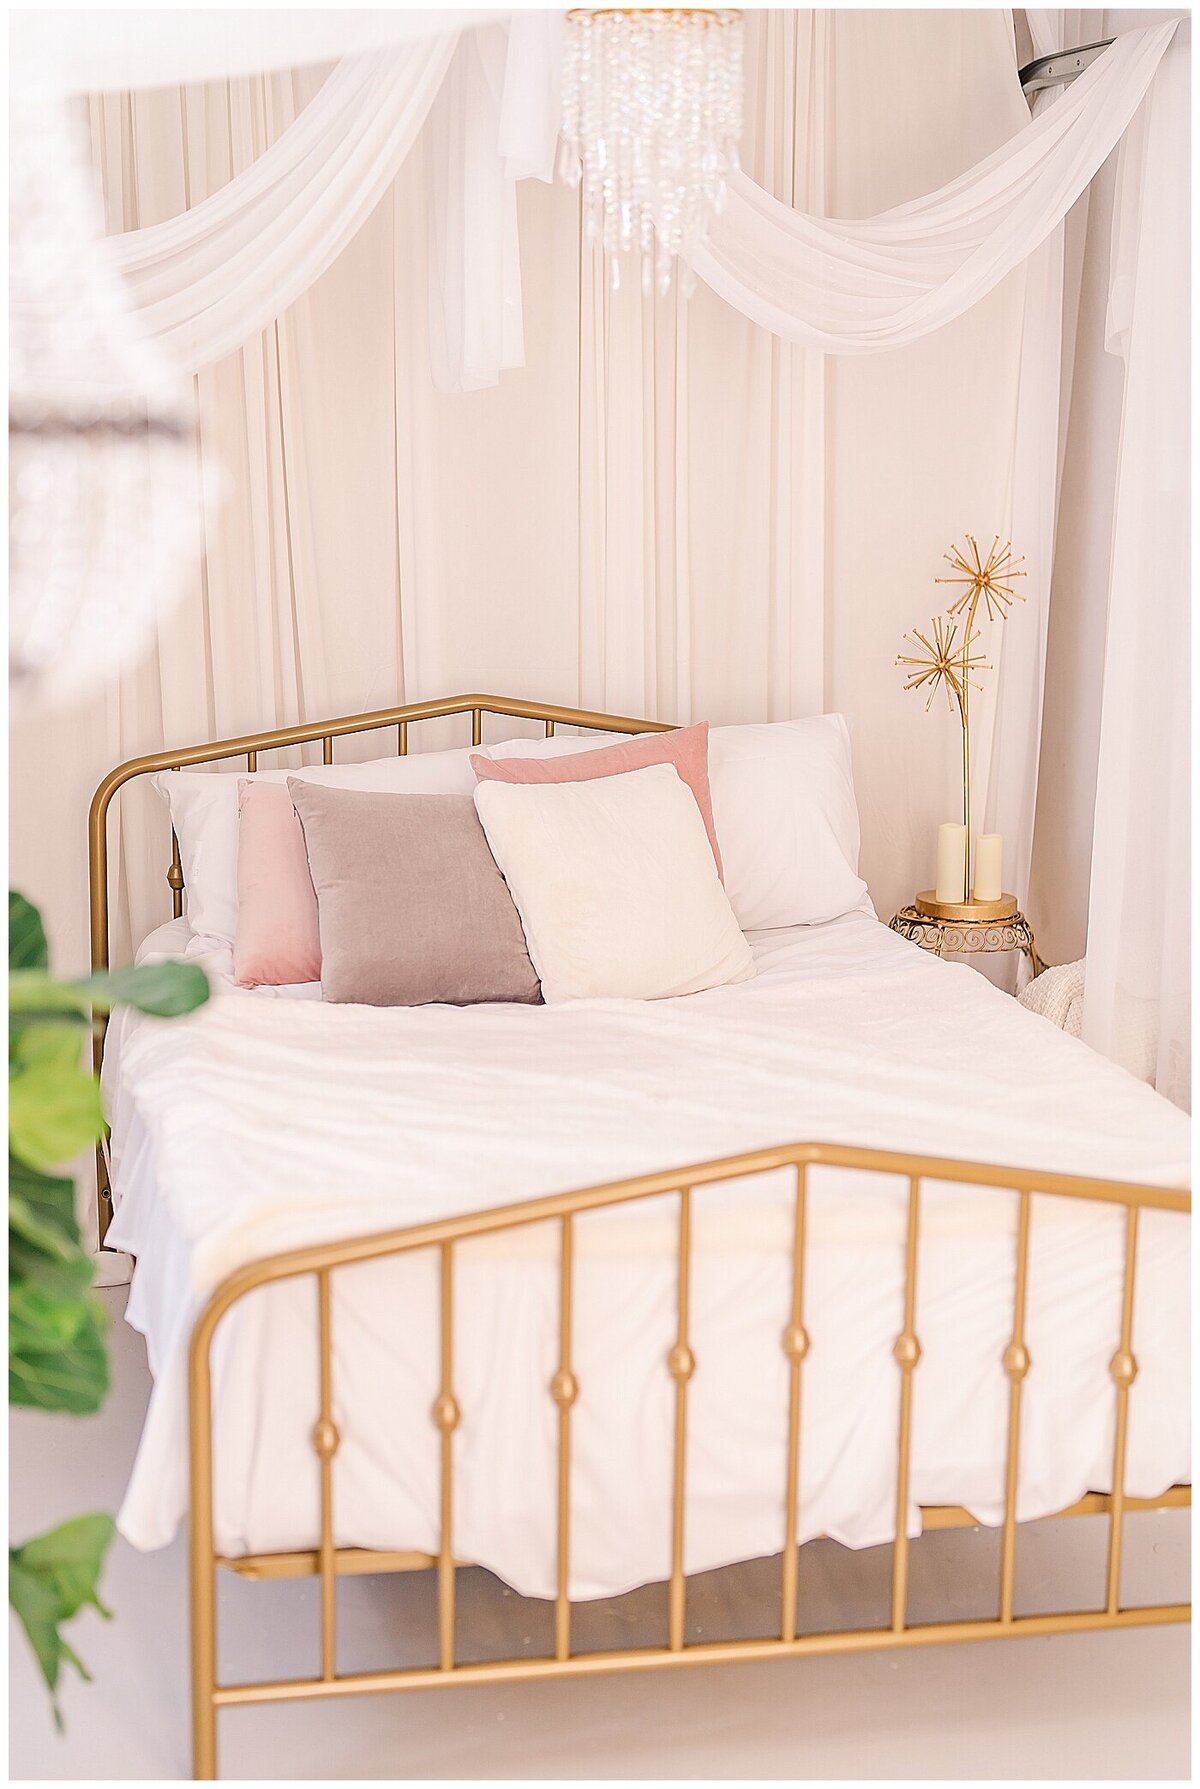 Bright and airy bedroom scene for boudoir photography with white draping